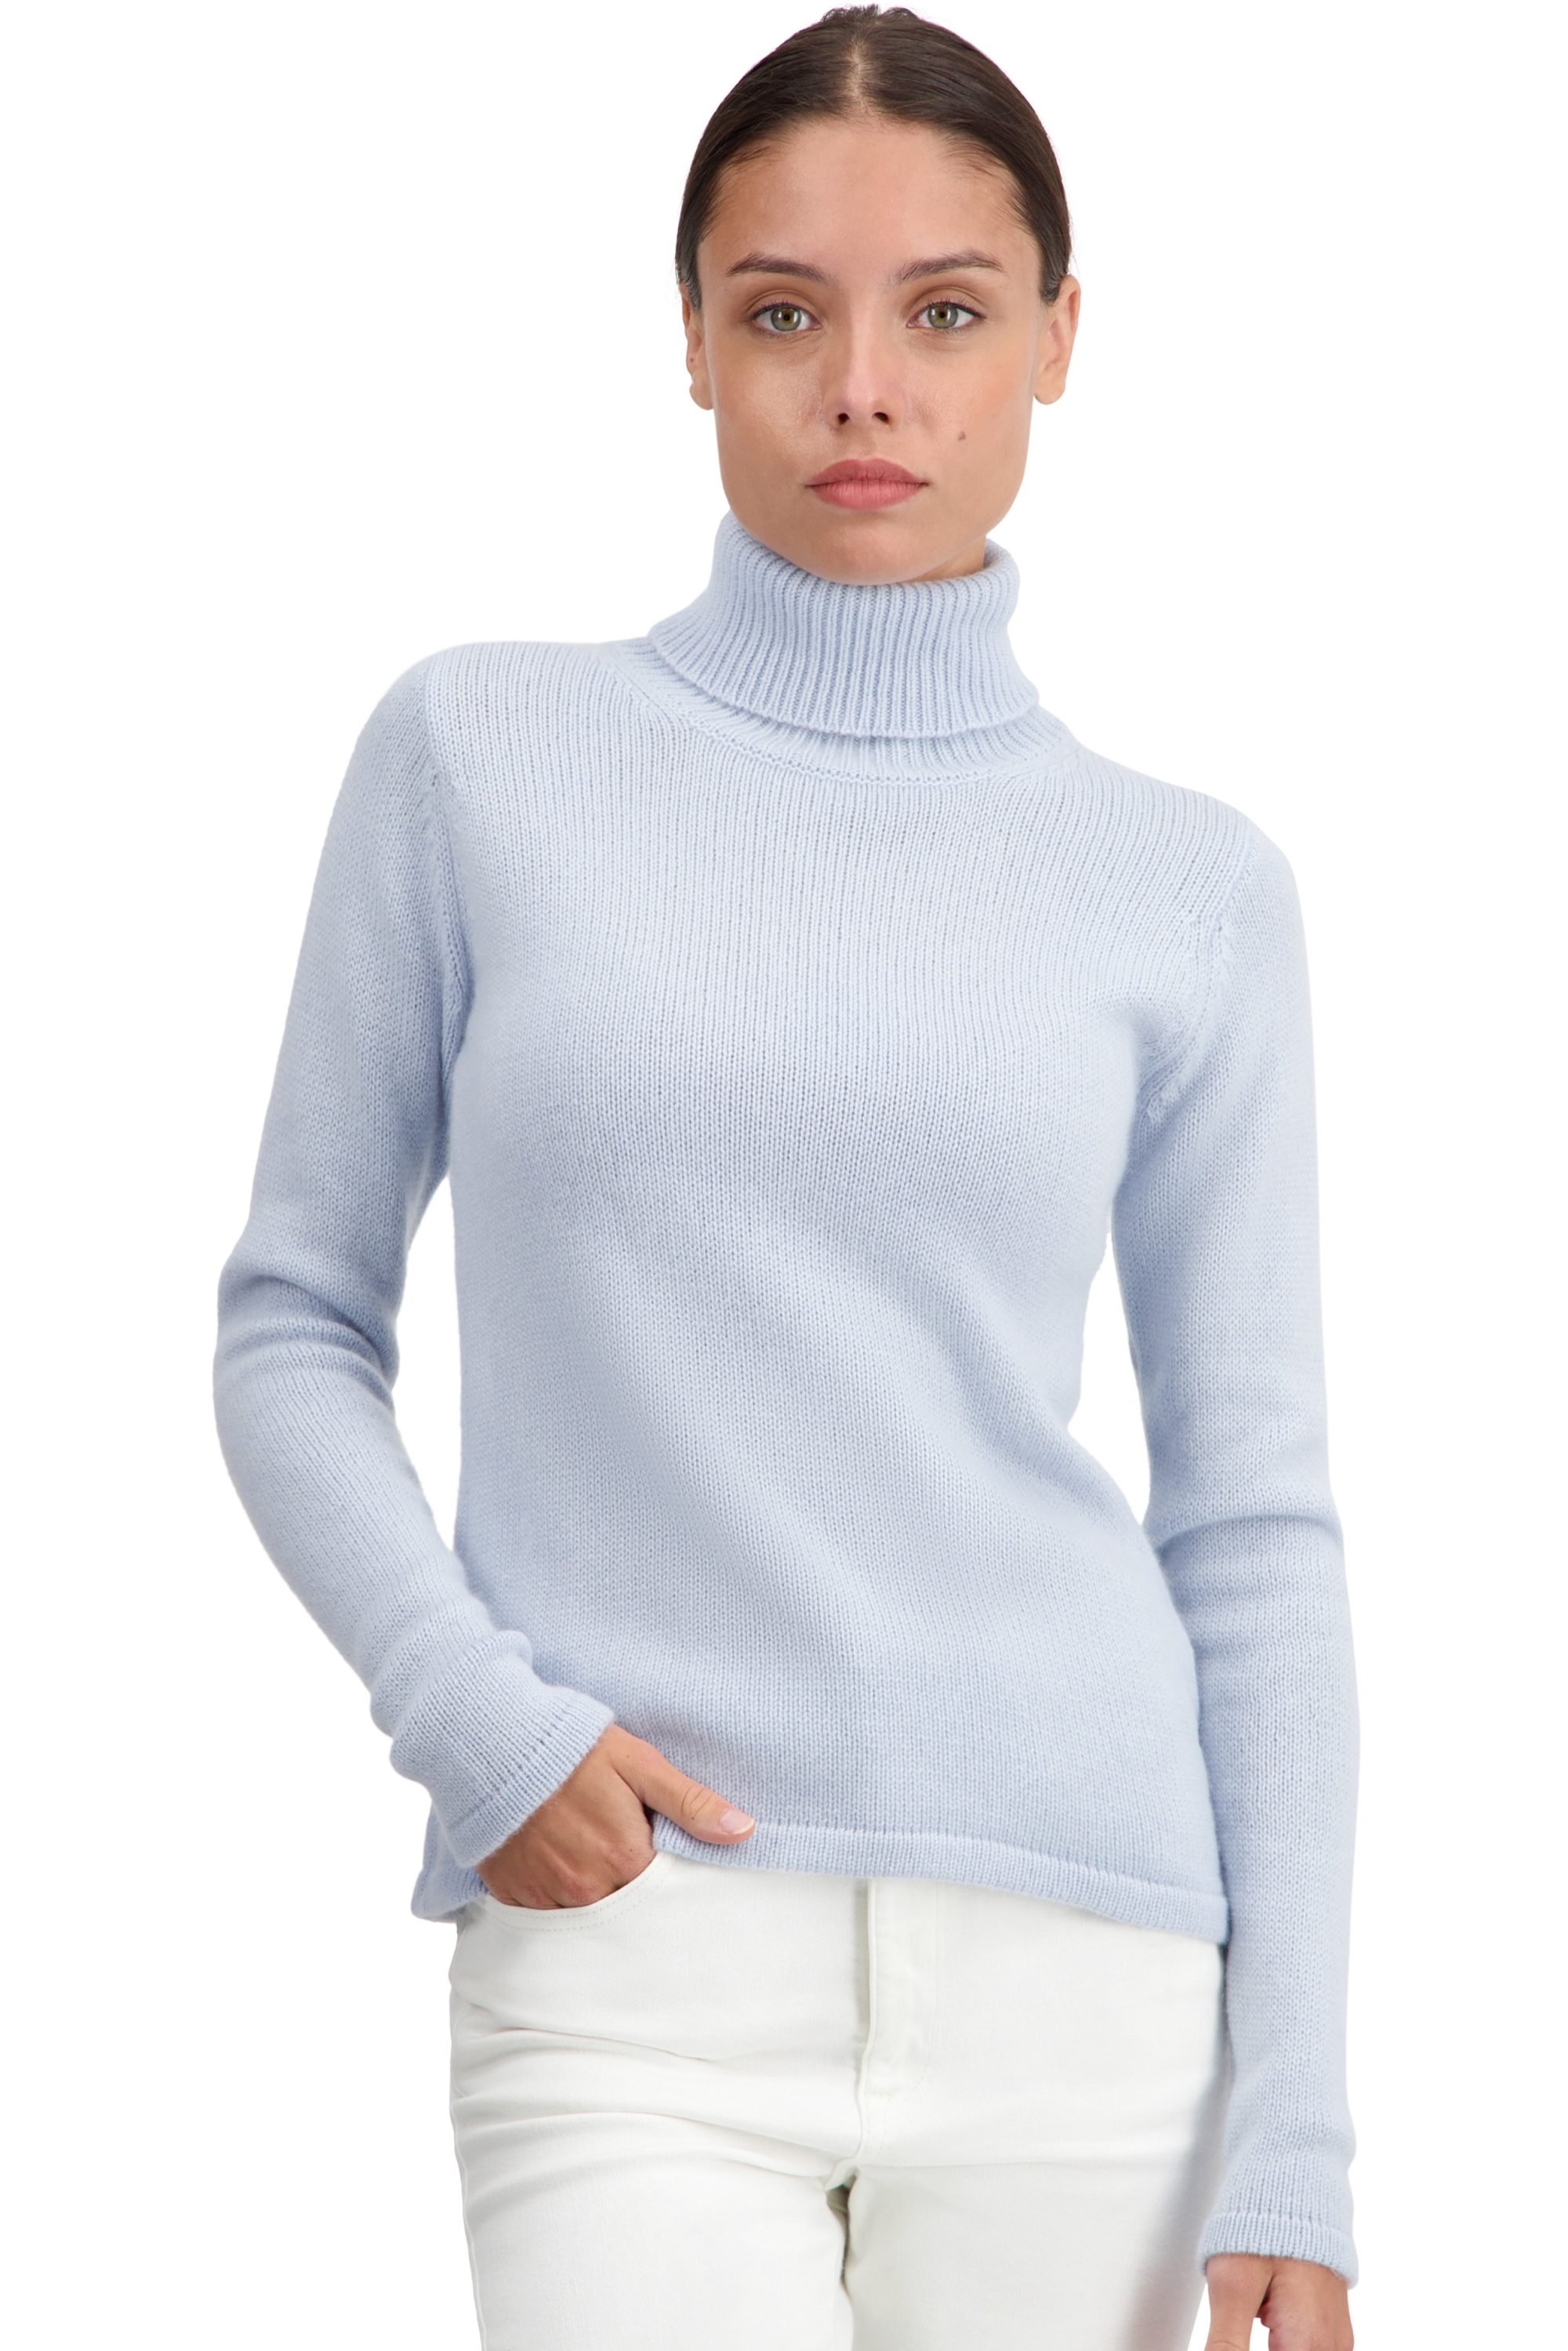 Cashmere ladies basic sweaters at low prices taipei first whisper xl